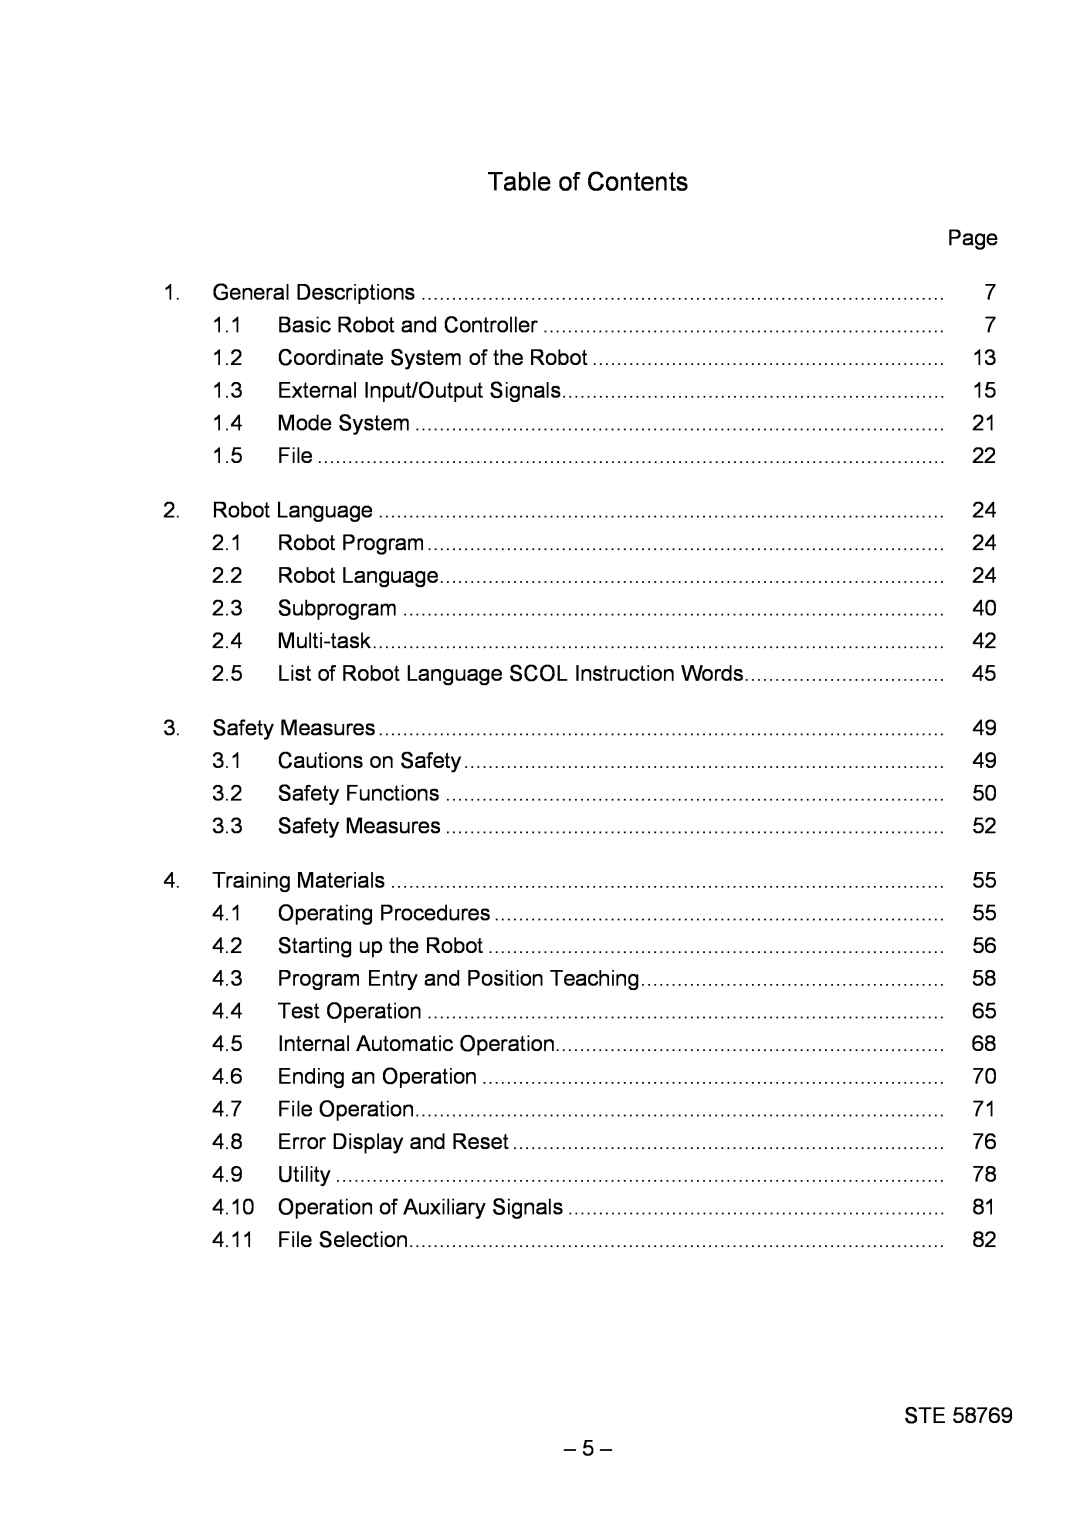 Toshiba SR-H Series instruction manual Table of Contents 